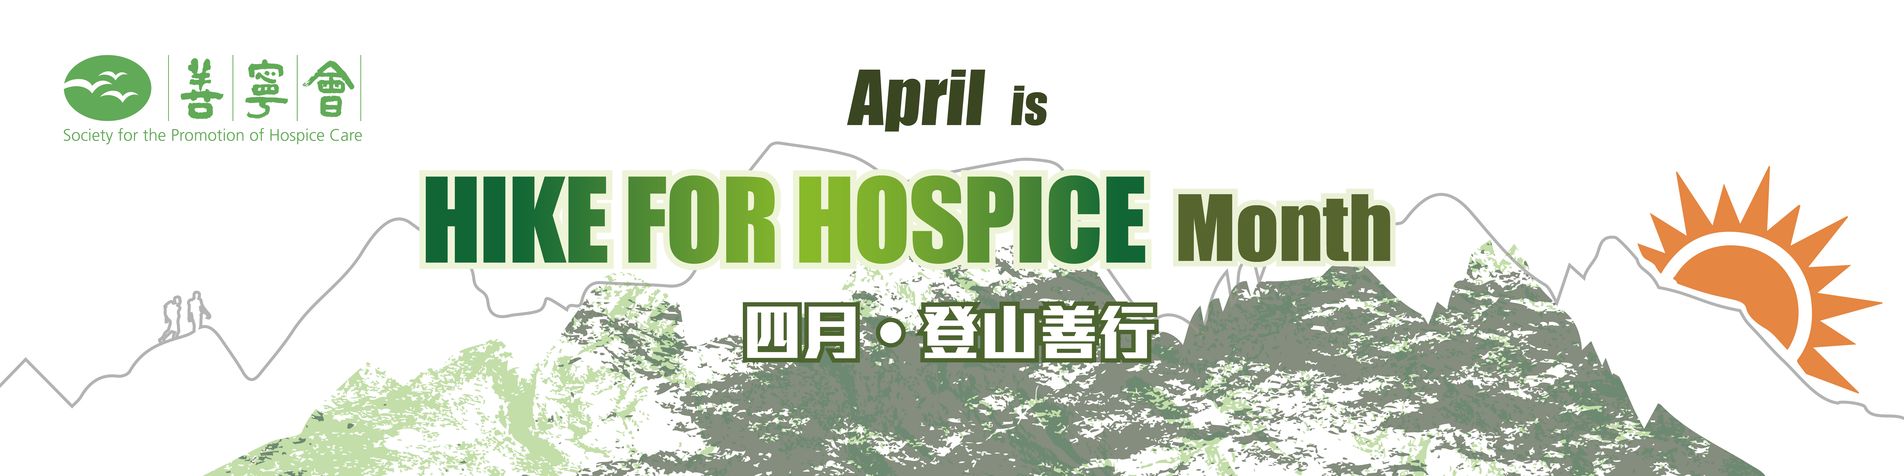 SPHC's Hike for Hospice Month - on April